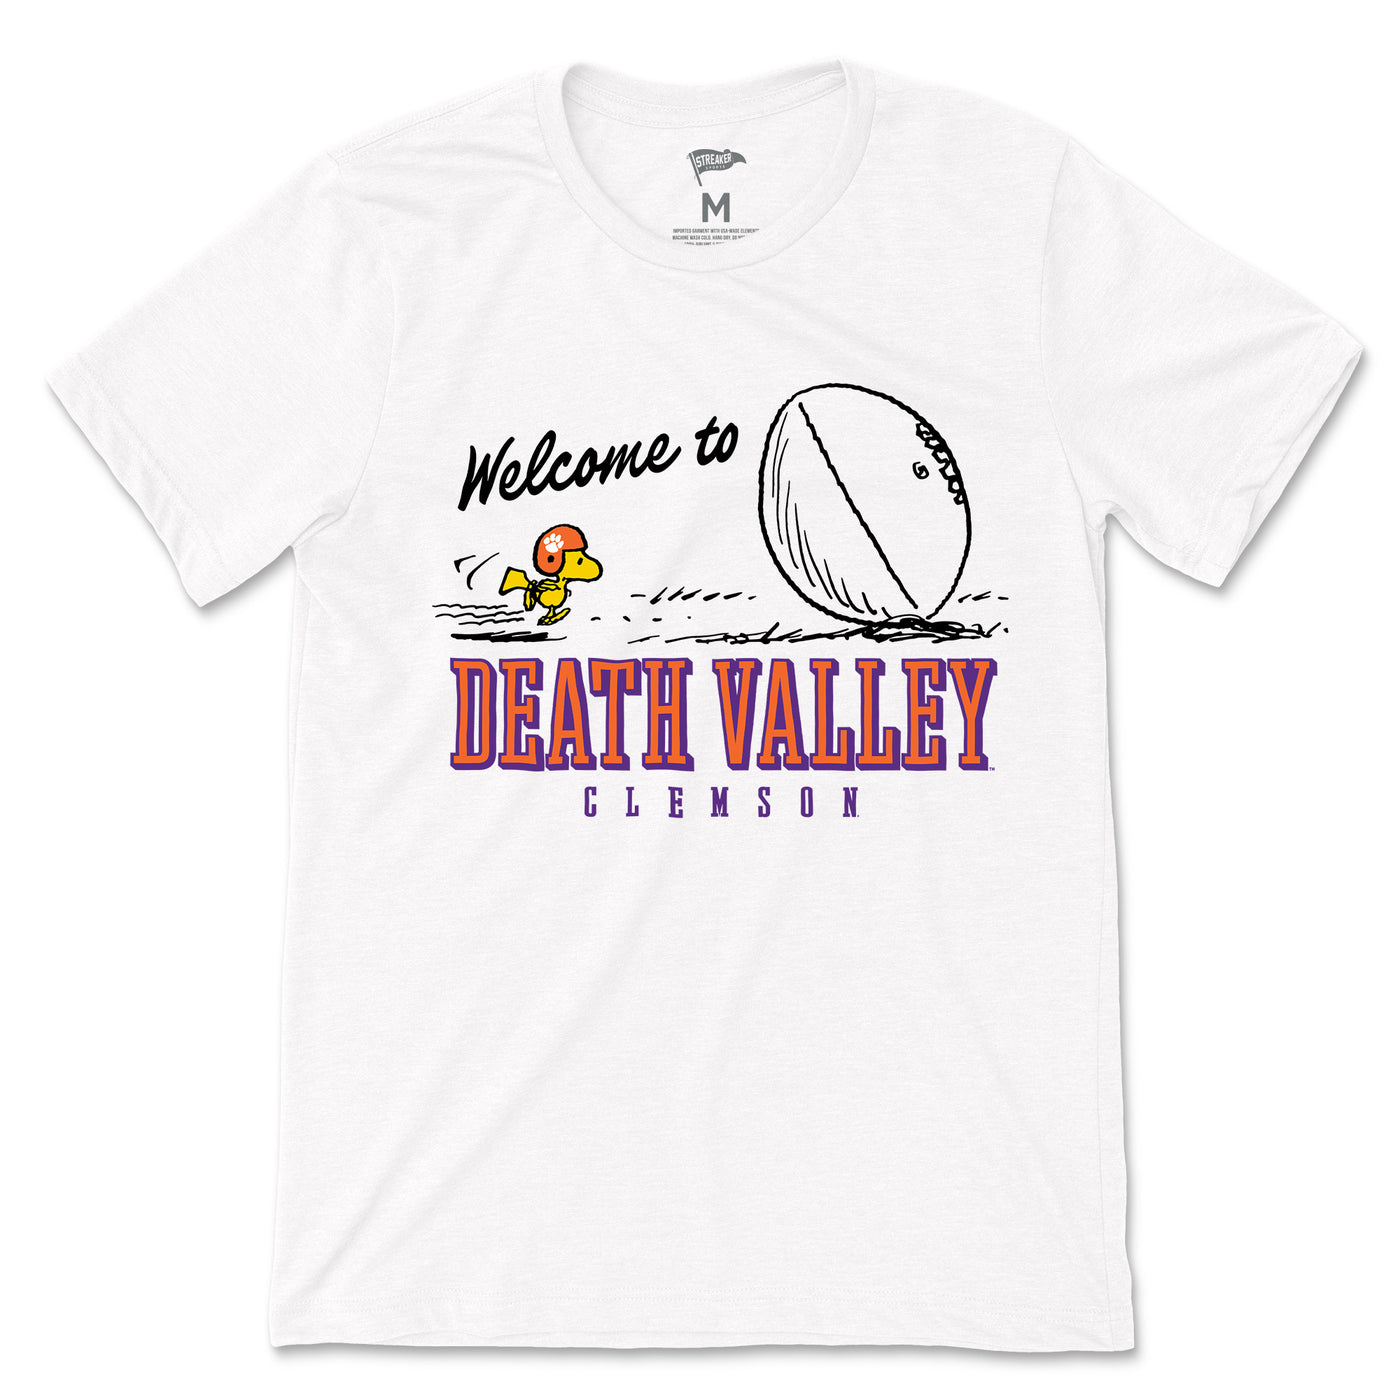 Peanuts x Clemson Welcome to Death Valley Tee - Streaker Sports